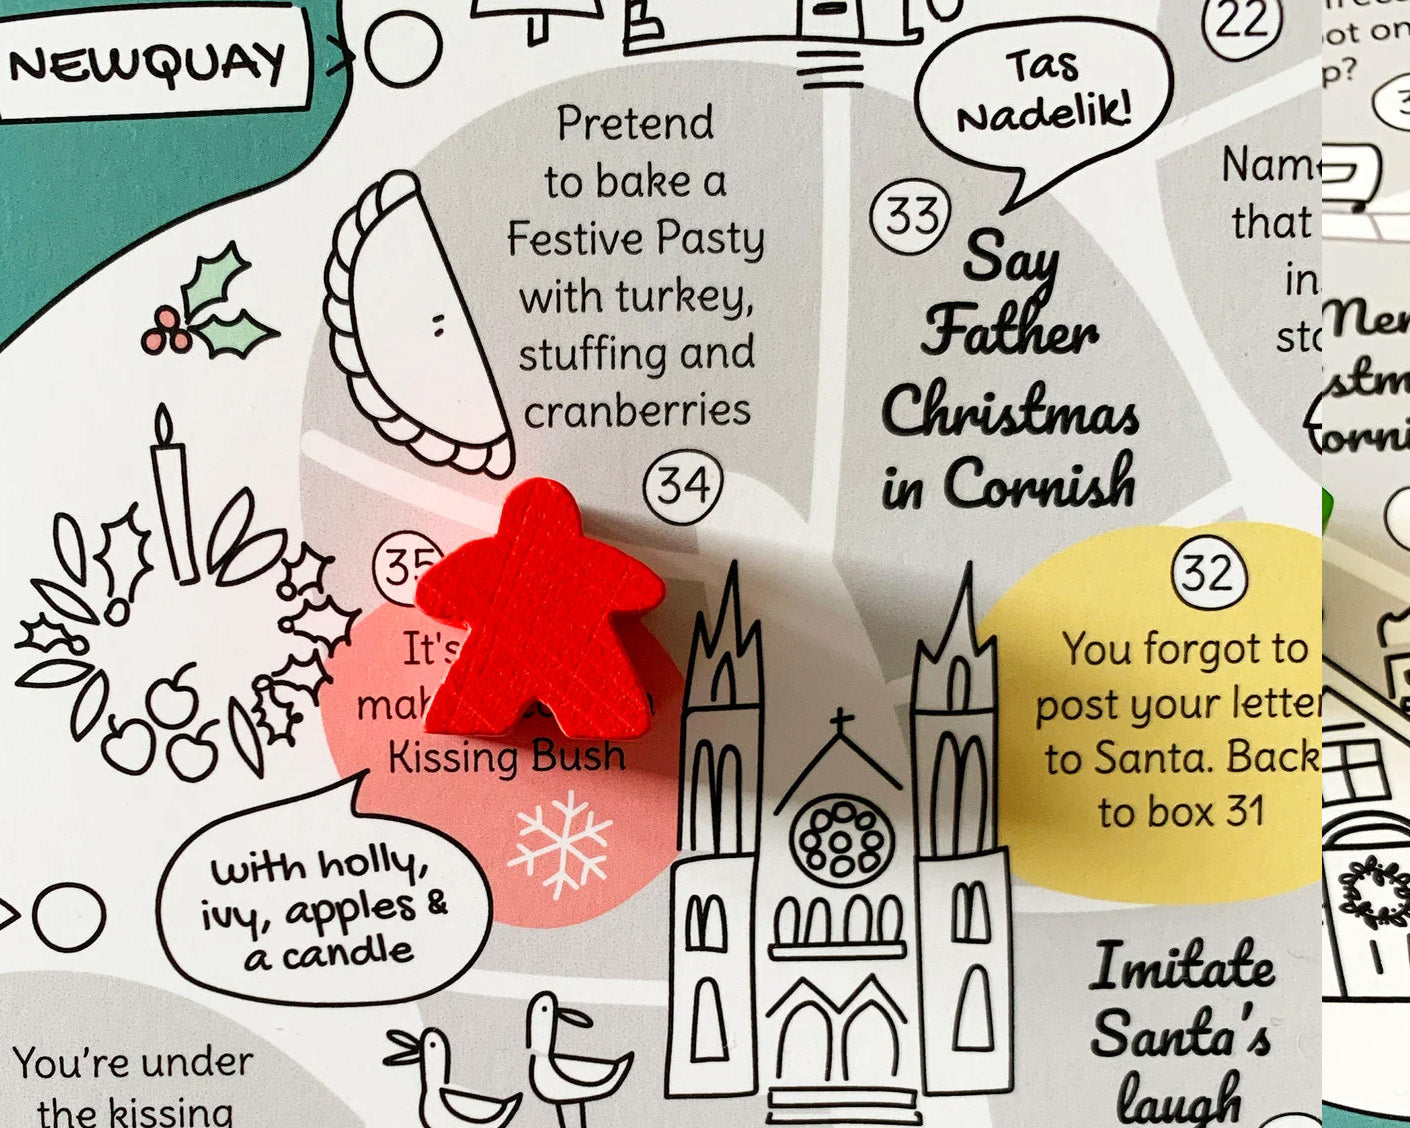 Cornwall Christmas board game detail with red wooden mark. Featuring Truro Cathedral.